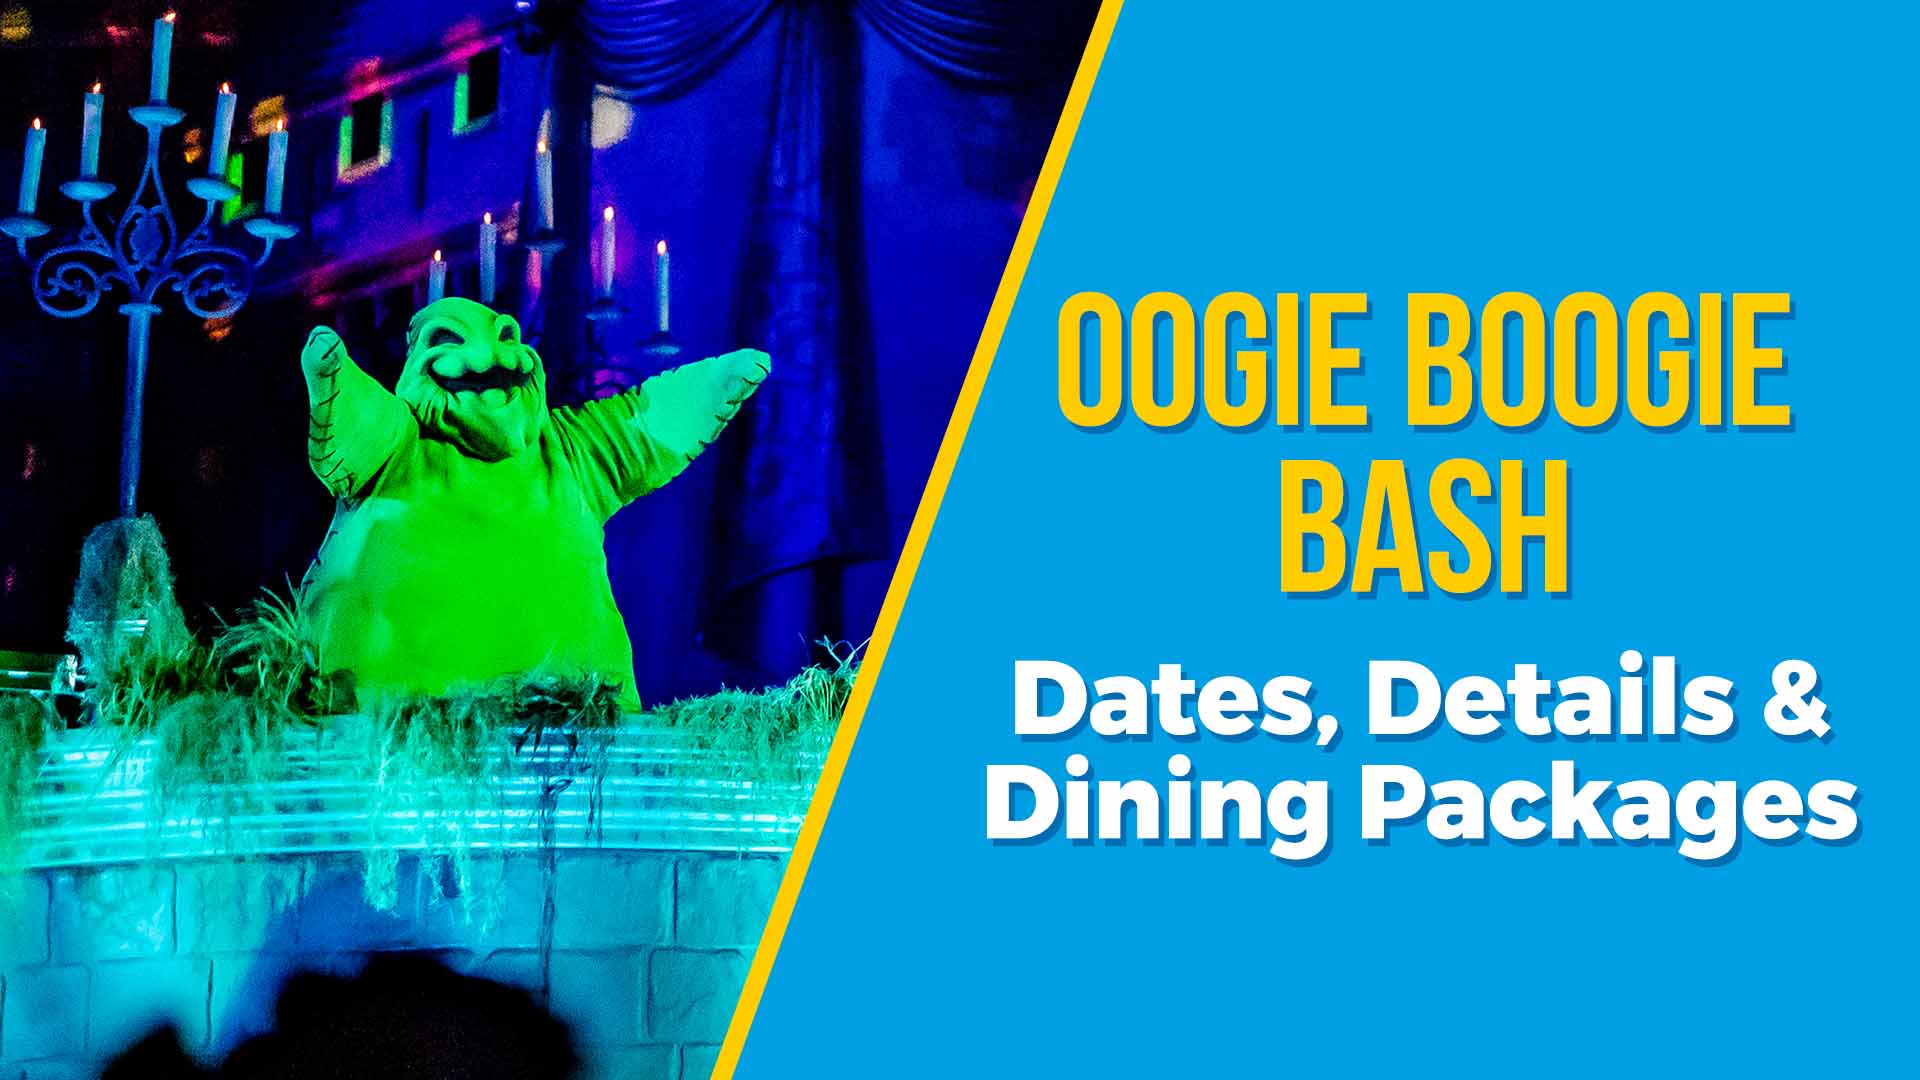 Dates and Details for Oogie Boogie Bash in Disneyland The